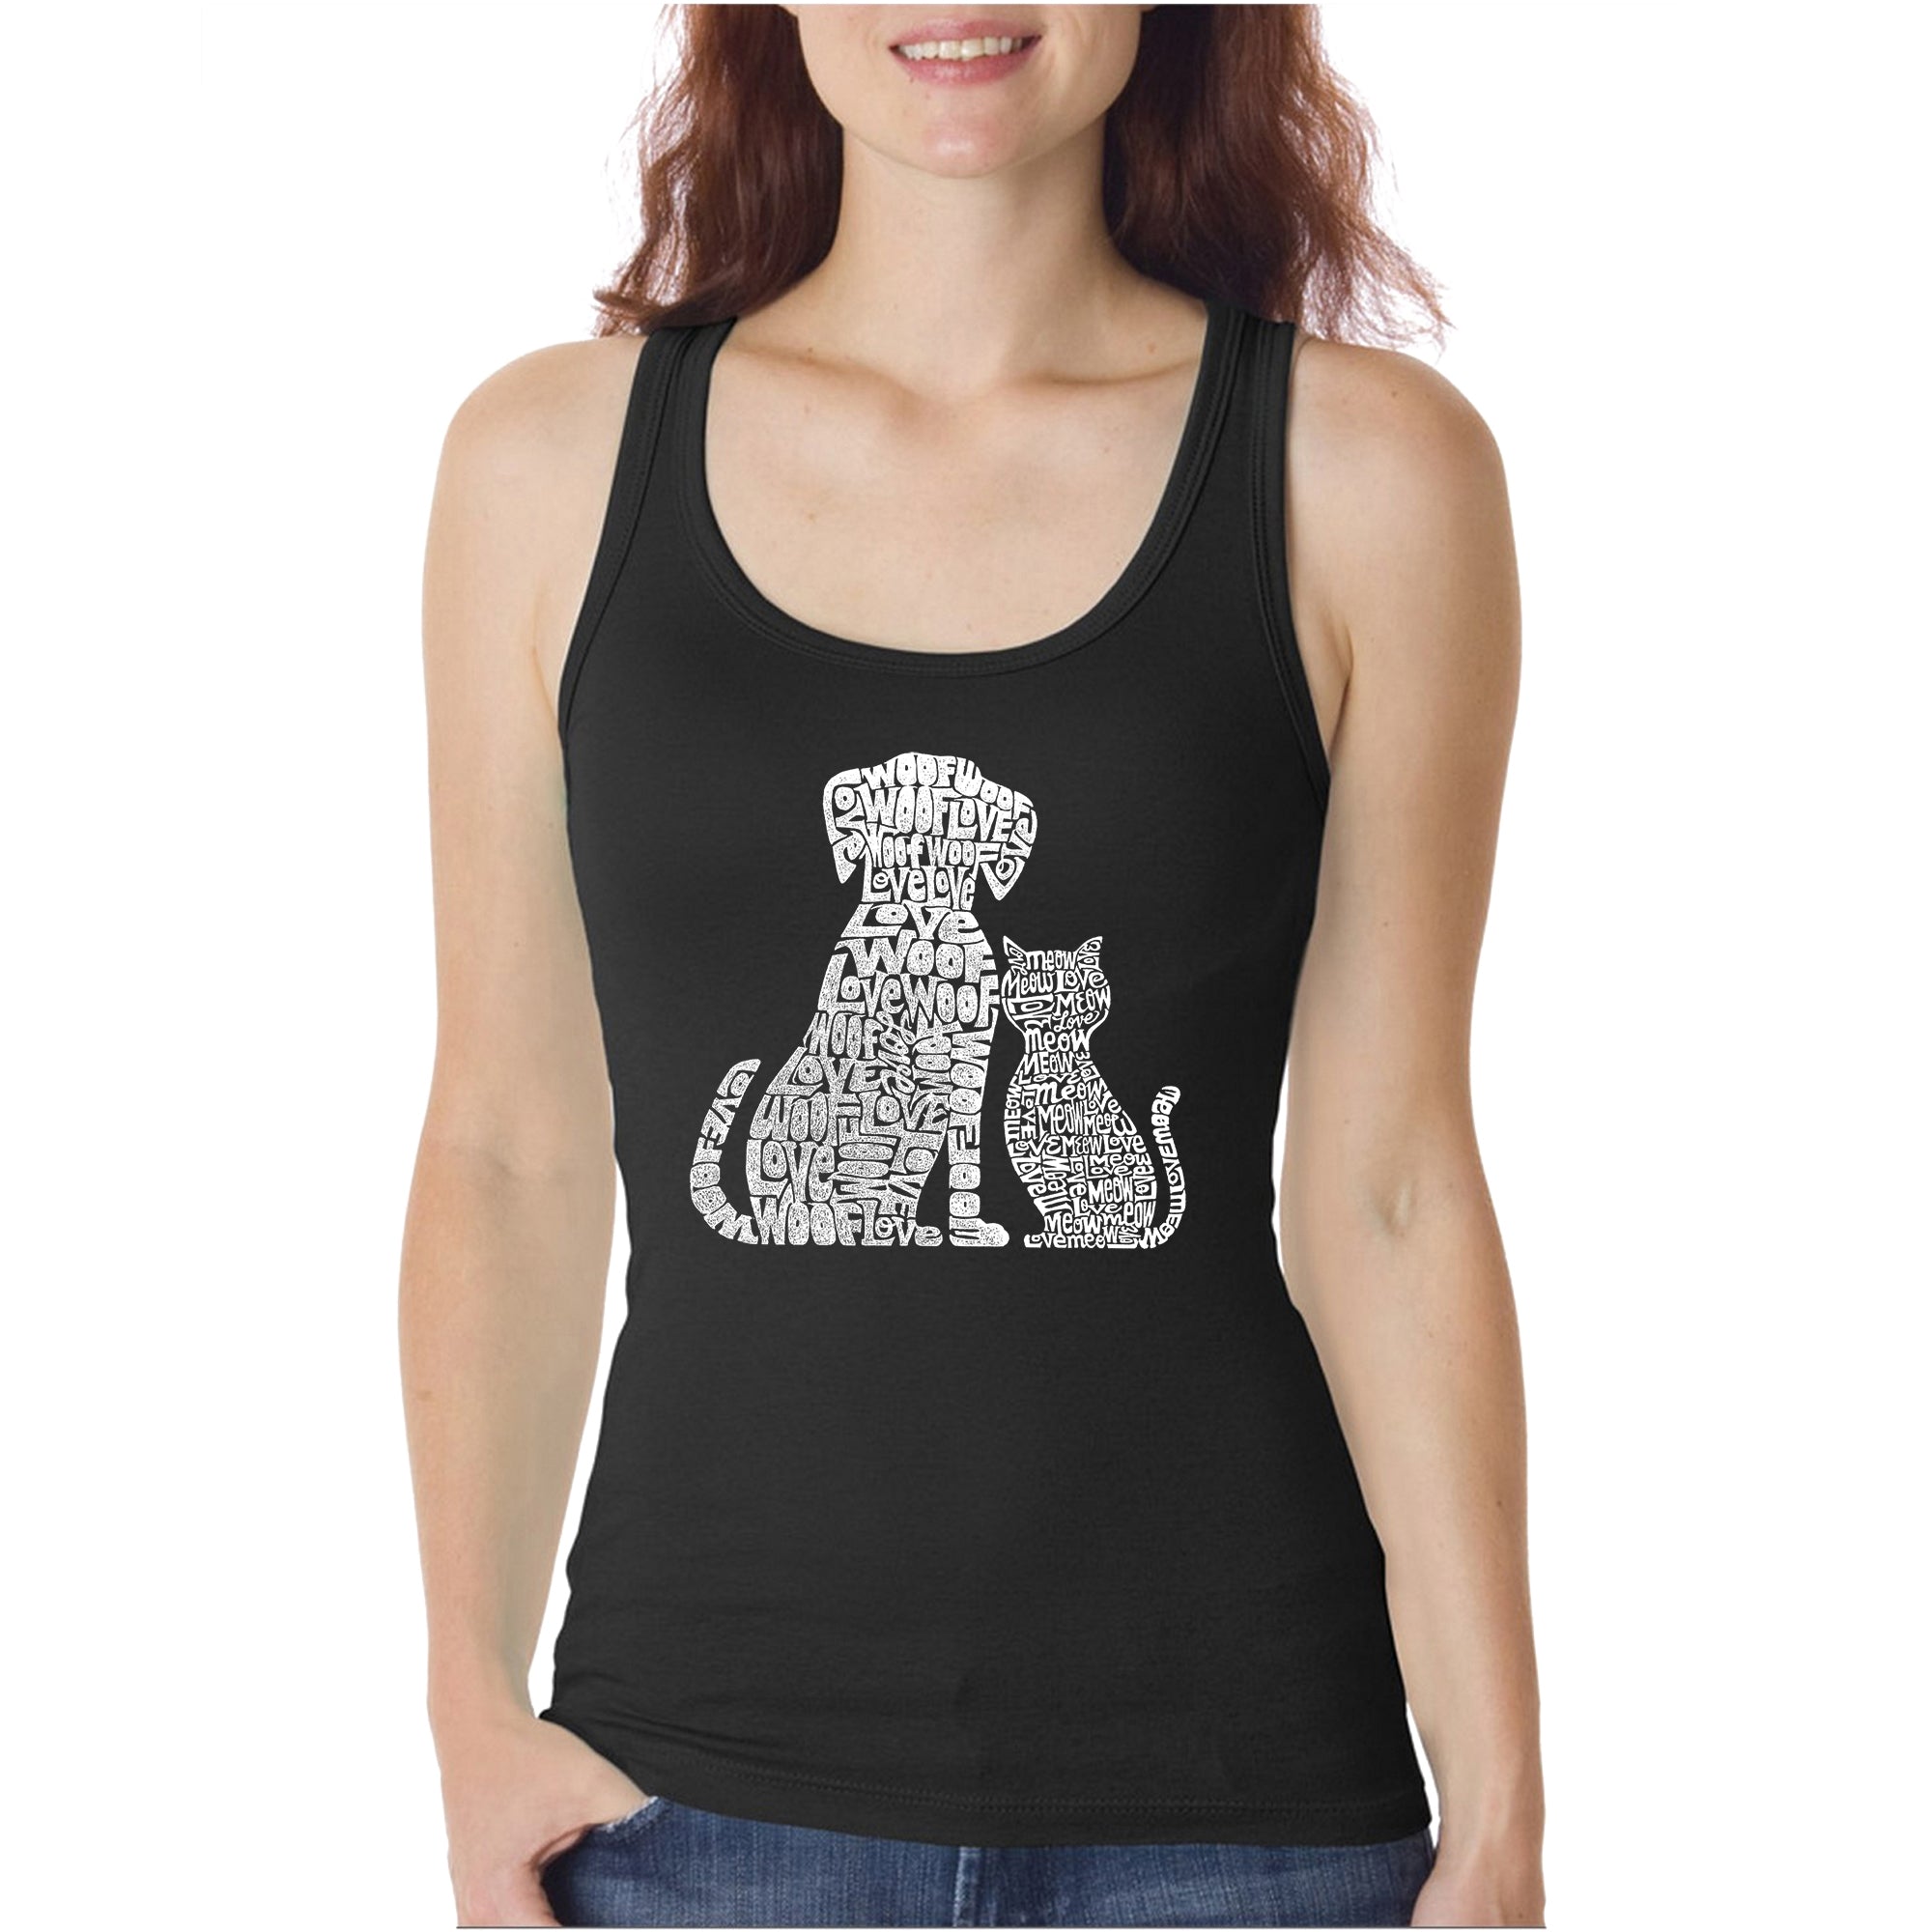 Dogs And Cats - Women's Word Art Tank Top - XX-Large